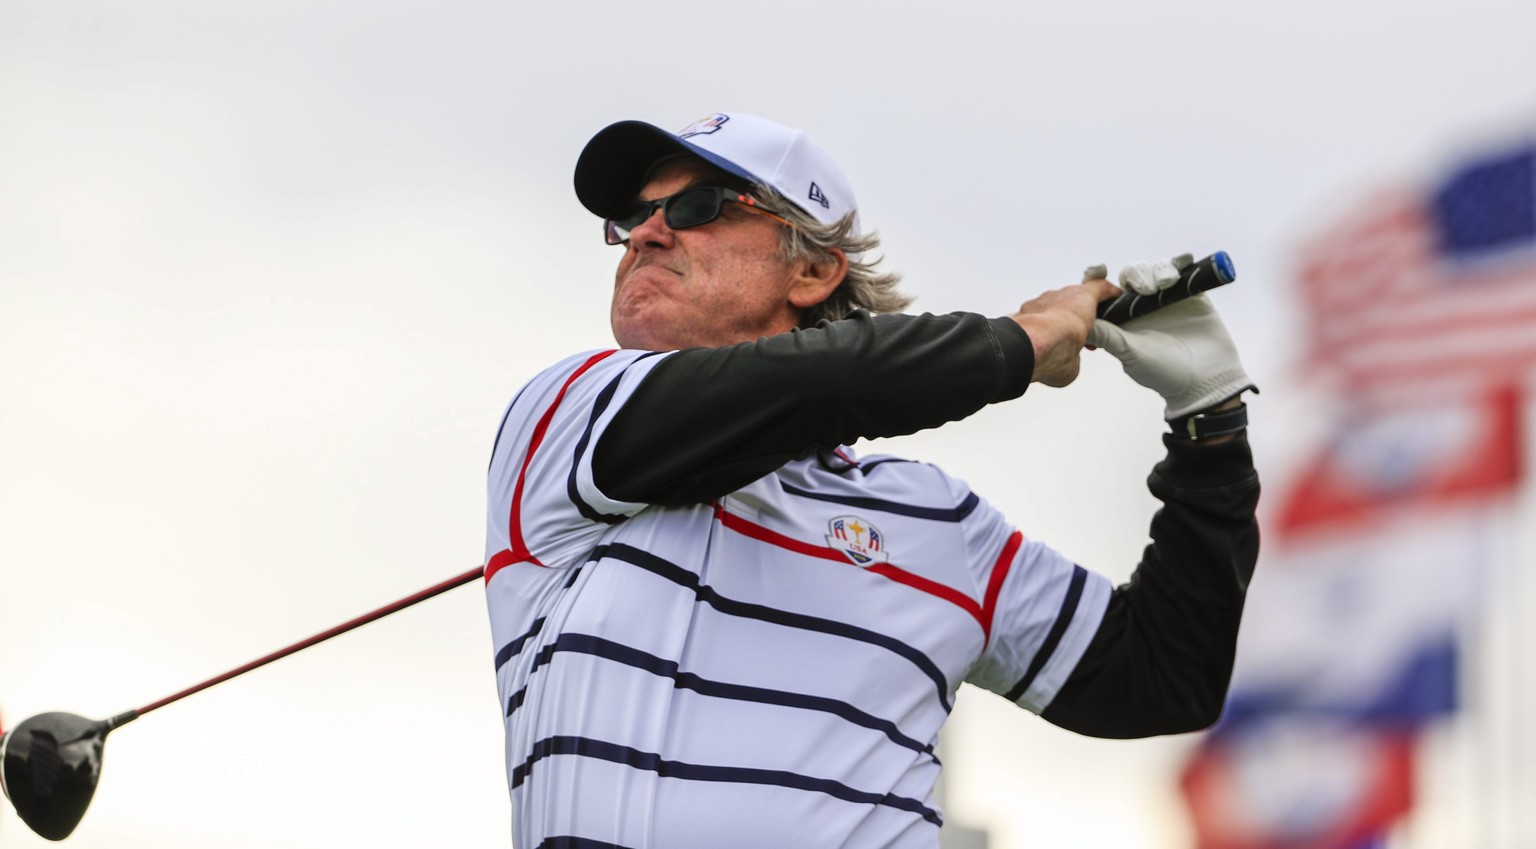 epa05559312 US actor Kurt Russell hits a tee shot on the second hole during the celebrity matches for the Ryder Cup 2016 at the Hazeltine National Golf Club in Chaska, Minnesota, USA, 27 September 201 ...